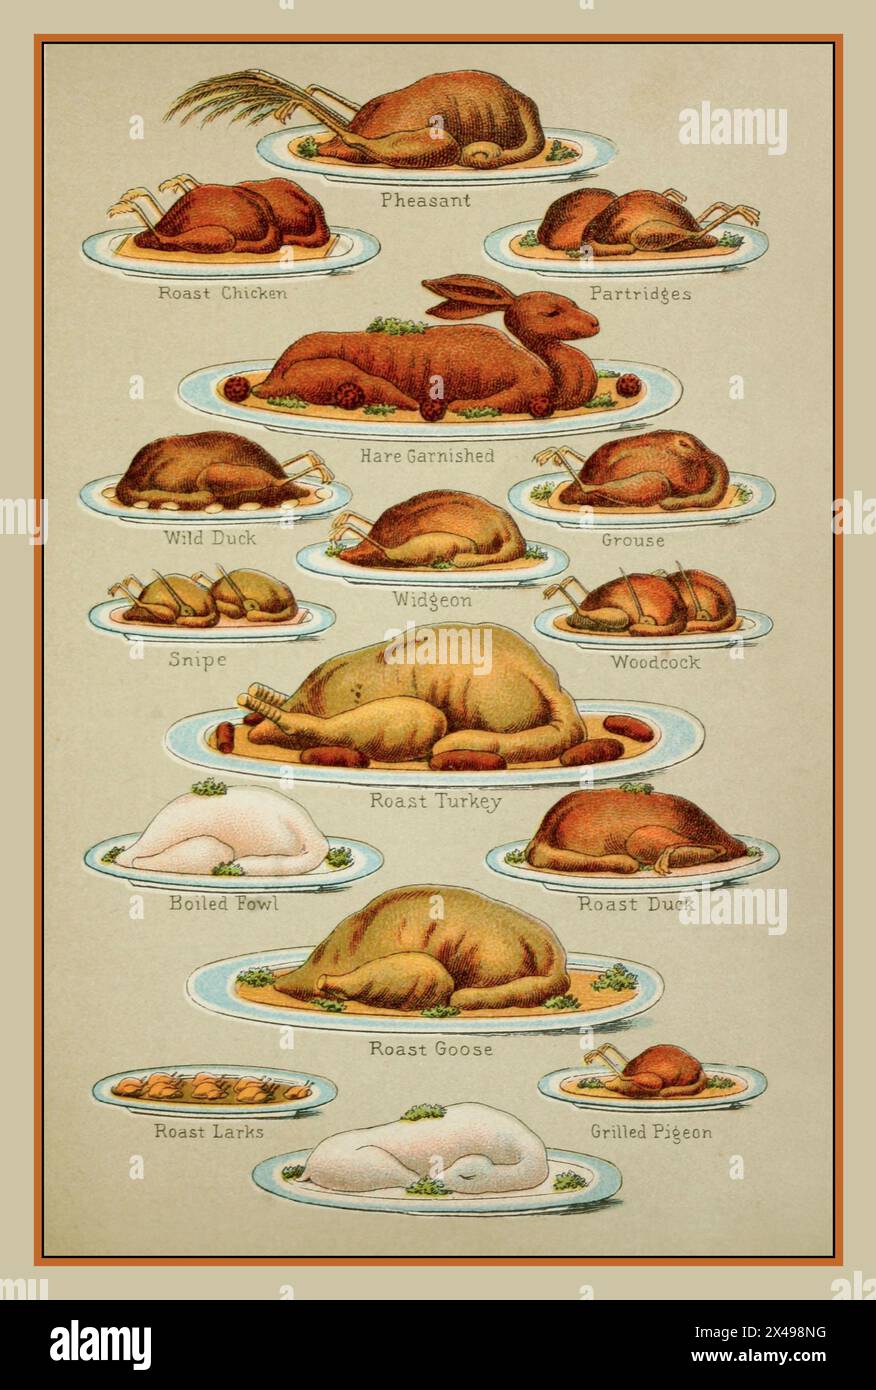 Victorian FOWL POULTRY GAME illustration of a variety of plated exotic Victorian game fowl and poultry dishes, including Pheasant, Partridge, Hare, Turkey, Duck, Goose, Pidgeon, Larks, Grouse and Woodcock etc. Stock Photo